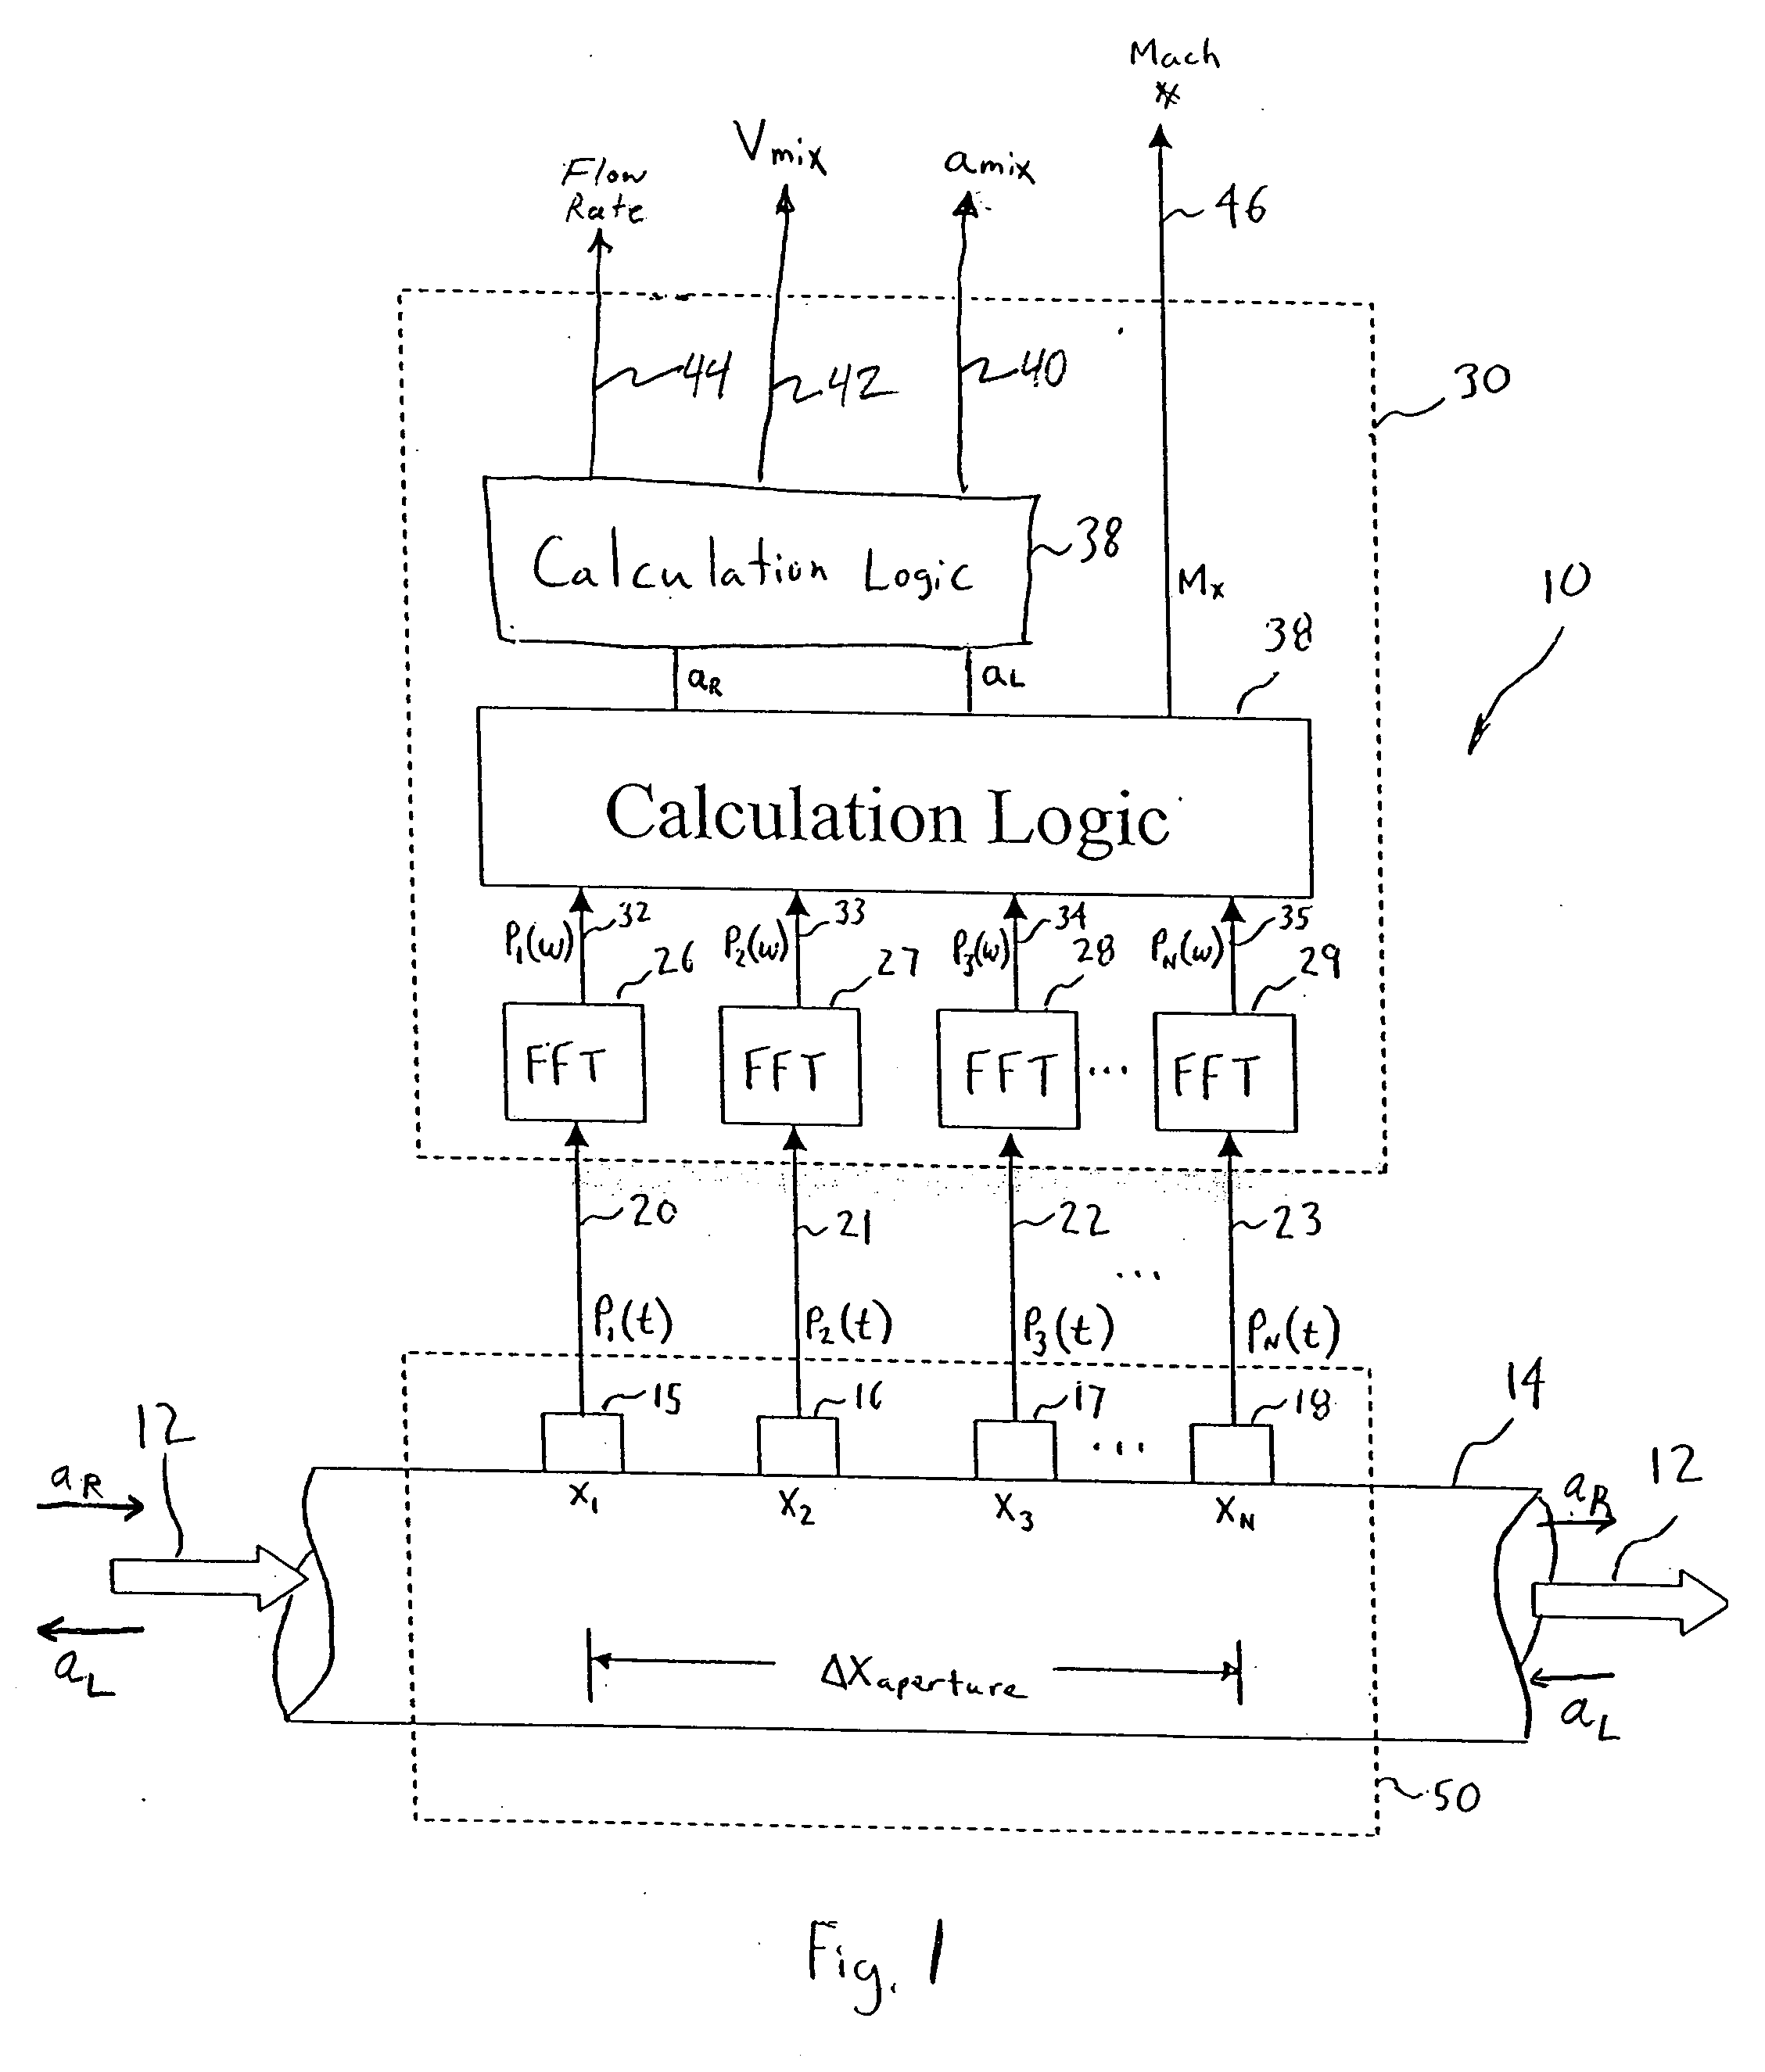 Apparatus for measuring velocity and flow rate of a fluid having a non-negligible axial mach number using an array of sensors